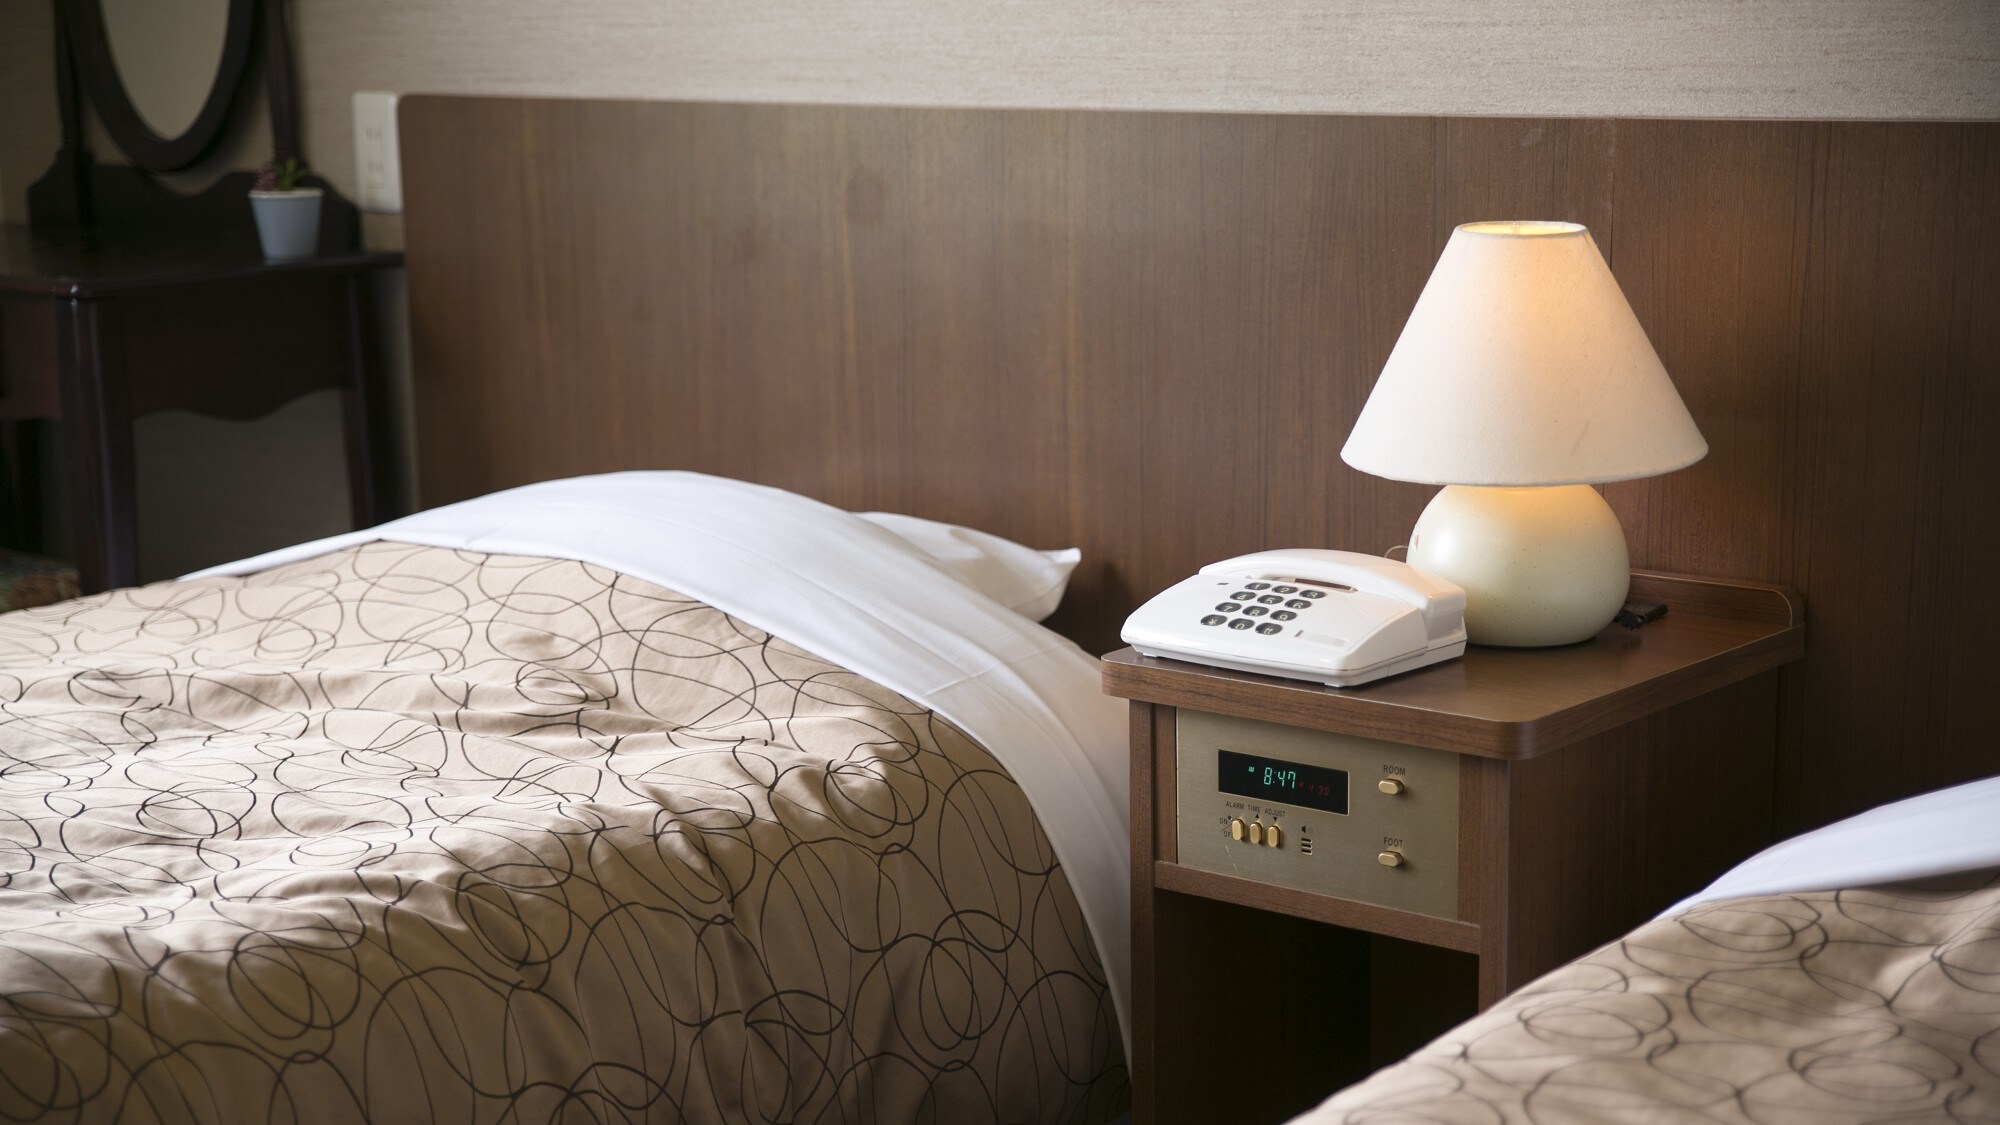 [Western-style room twin] The side table has an alarm function, and a wake-up call can be used to prevent double sleep.